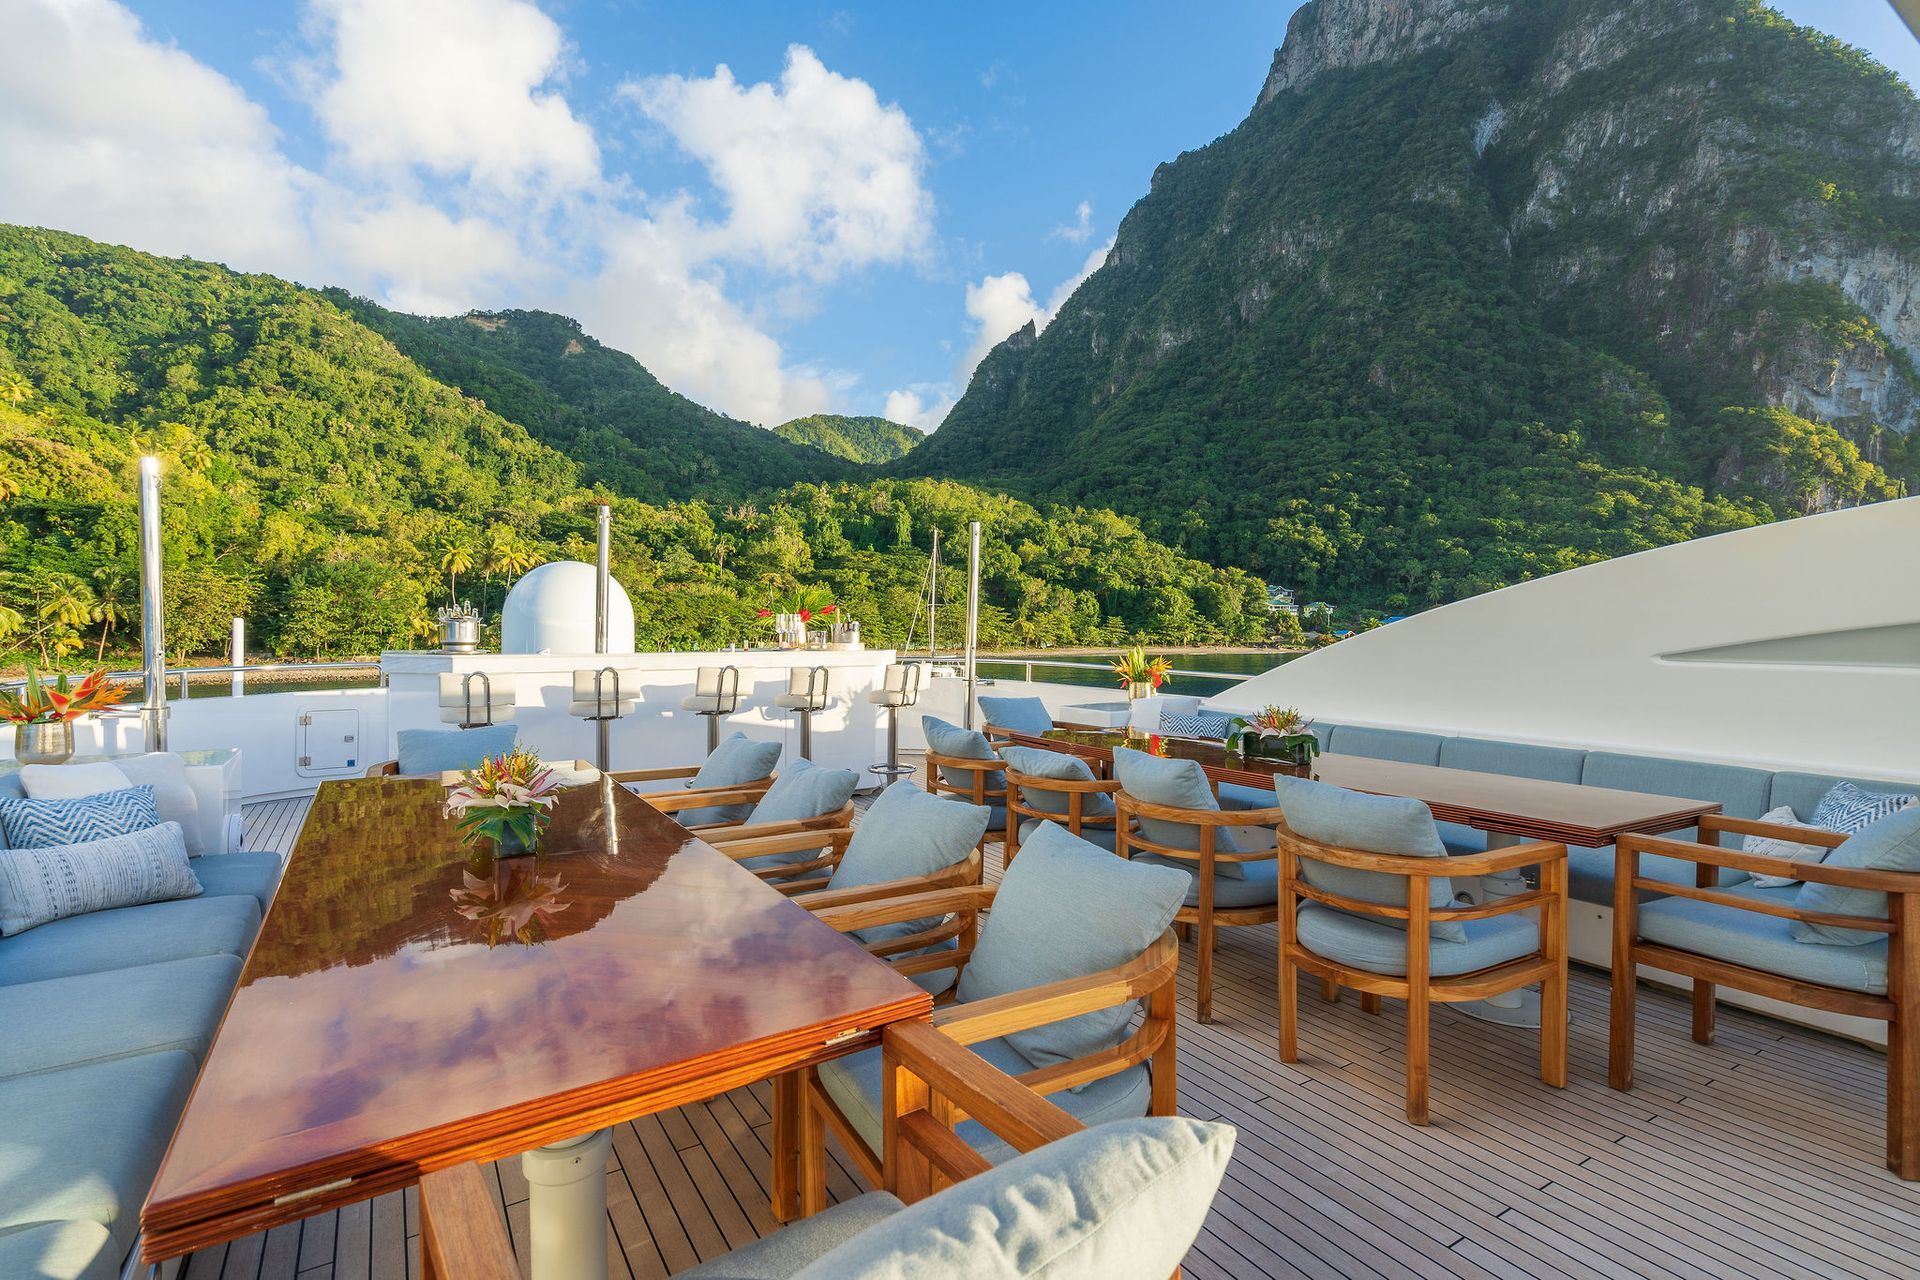 there are tables and chairs on the deck of a yacht with mountains in the background